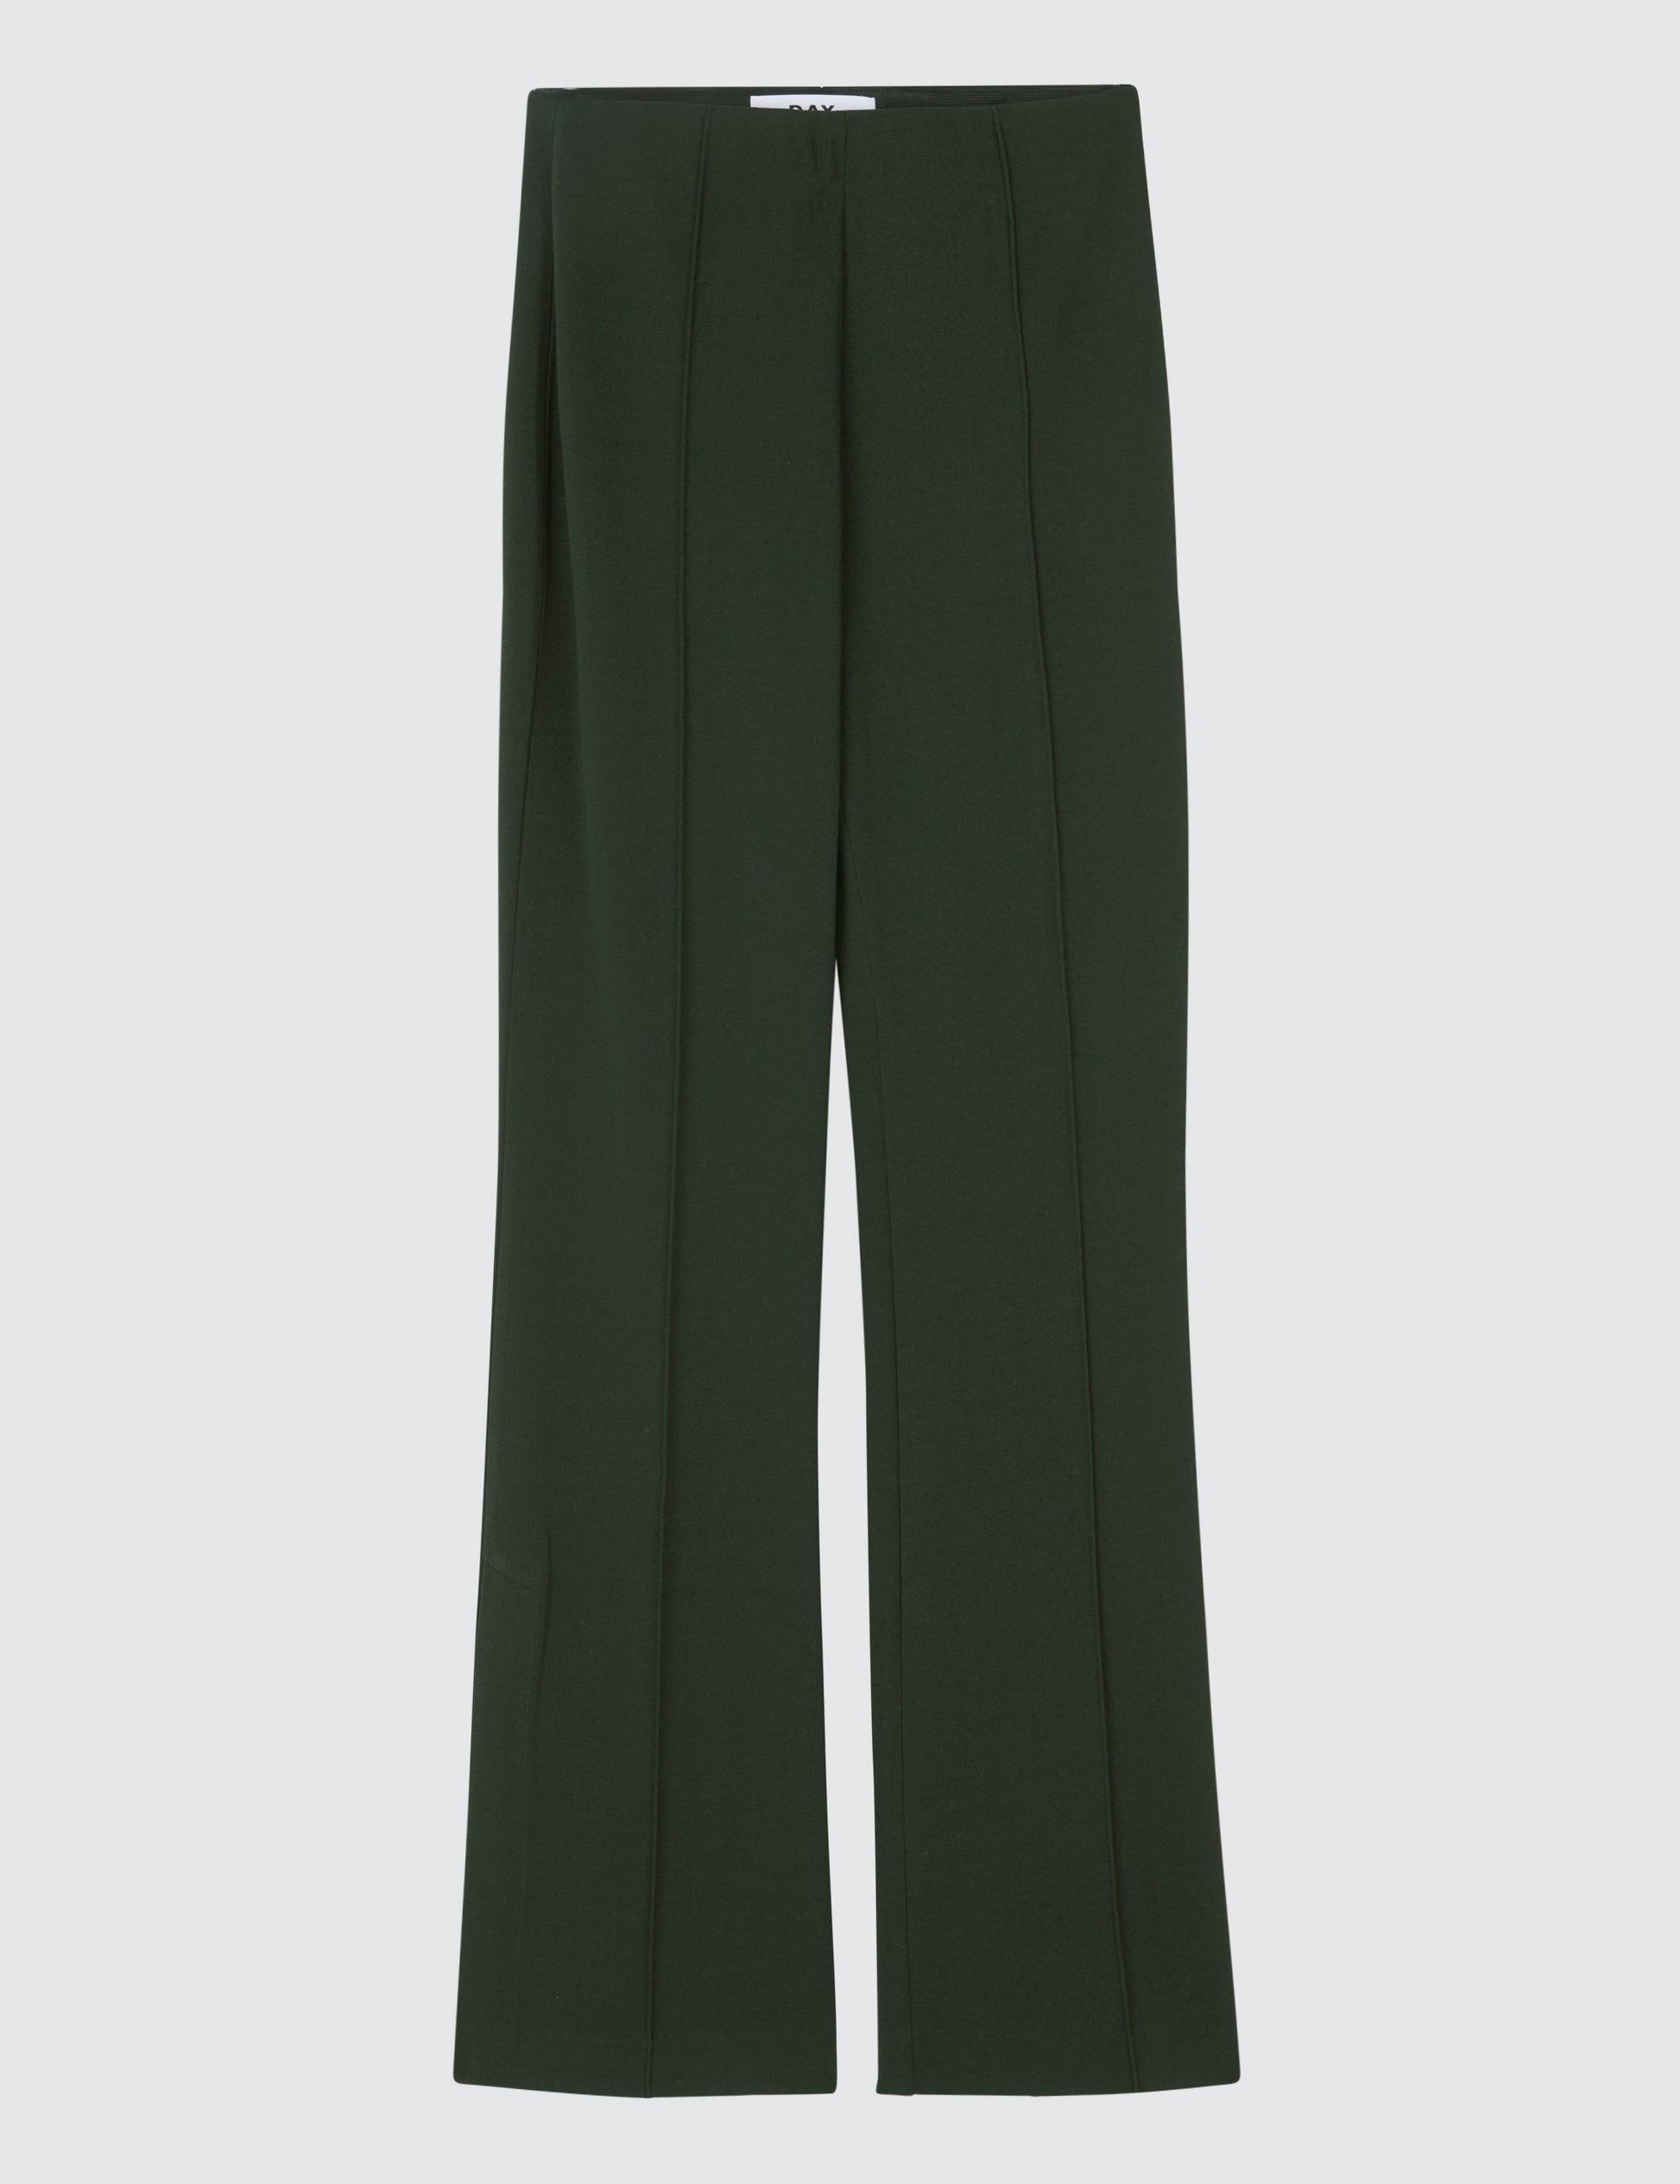 DAY BIRGER - Wagner Dark Green Stretch Trousers - 32 The Guild 